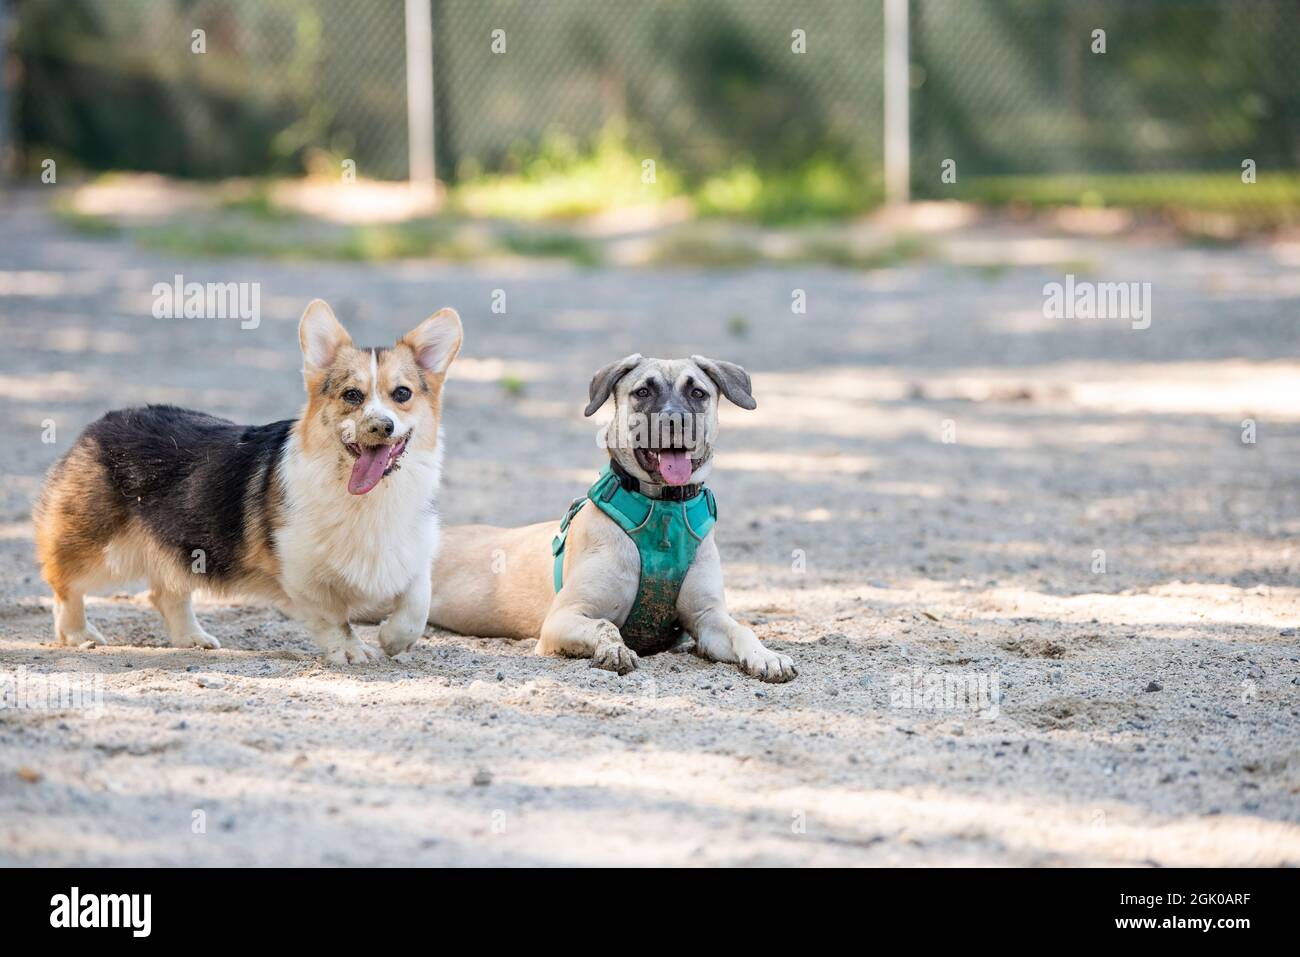 A one-year-old corgi puppy and a six-month-old mixed breed puppy stop to catch their breath while playing at the dog park in Arlington, Virginia. Thei Stock Photo